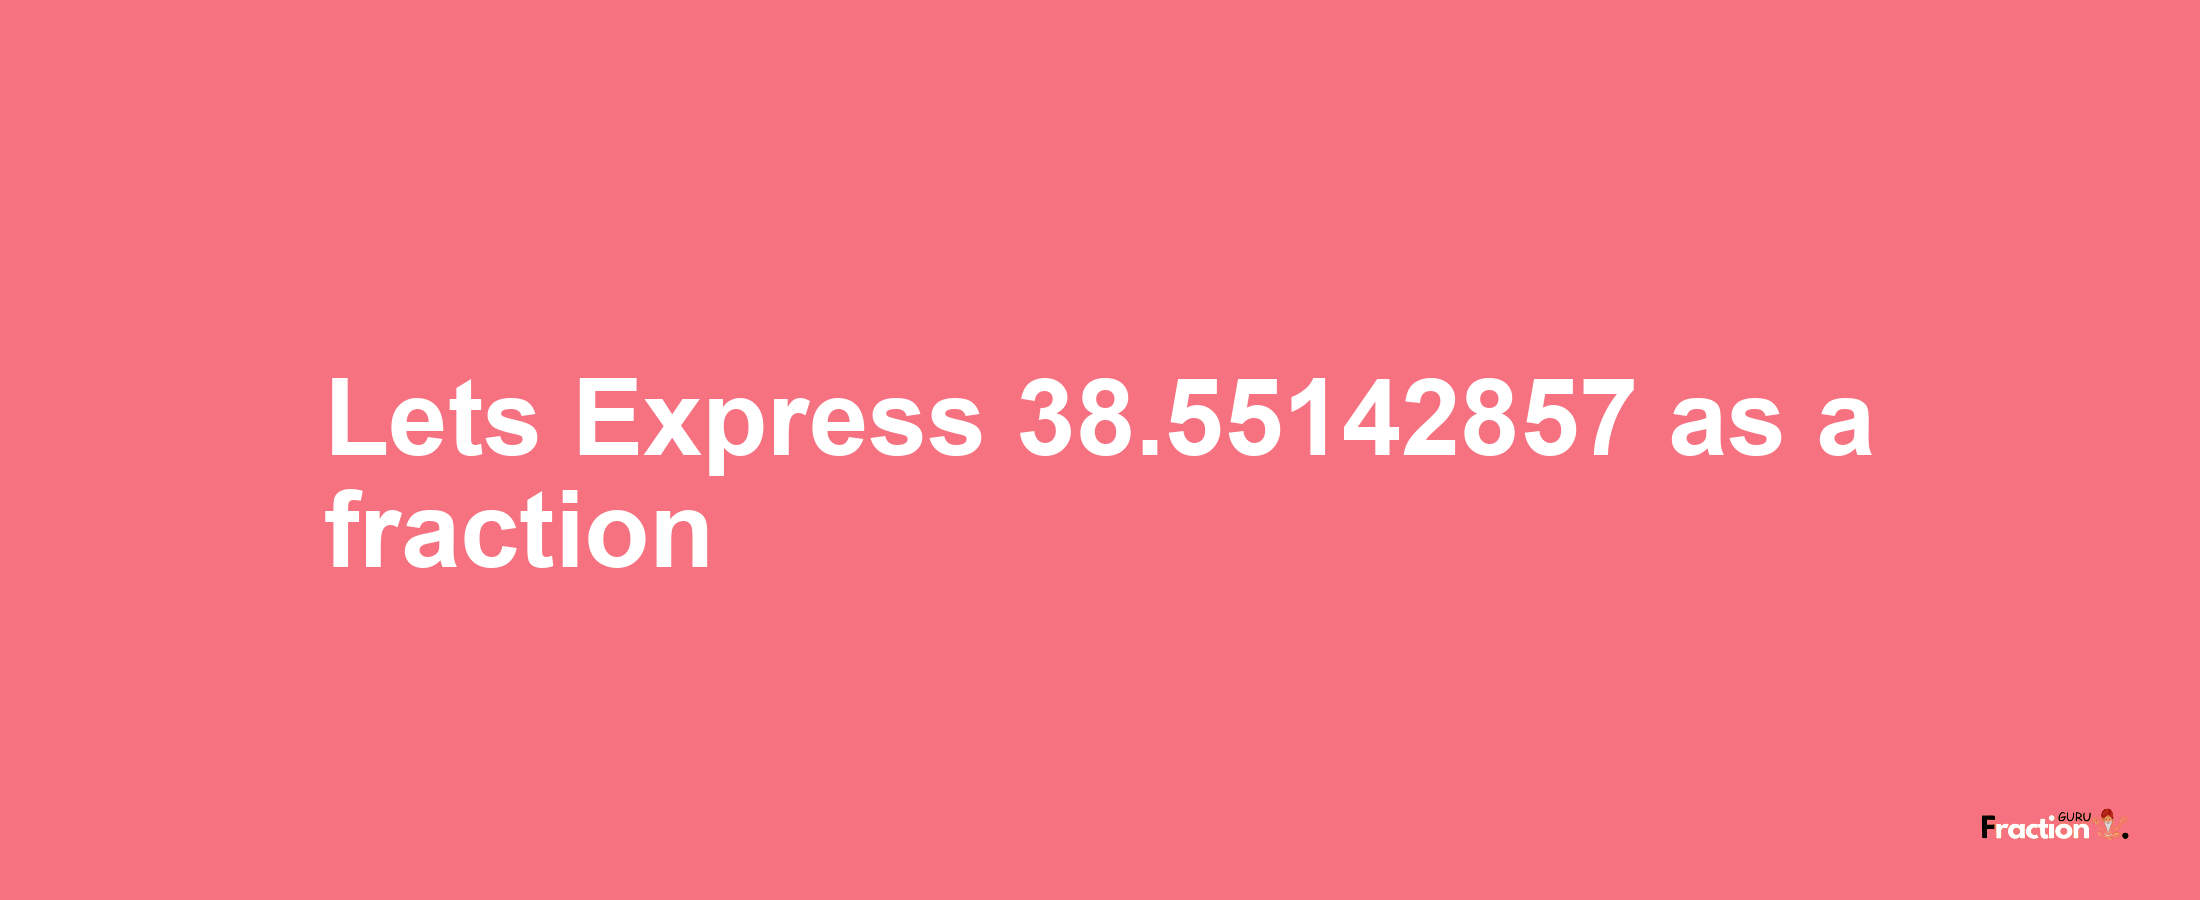 Lets Express 38.55142857 as afraction